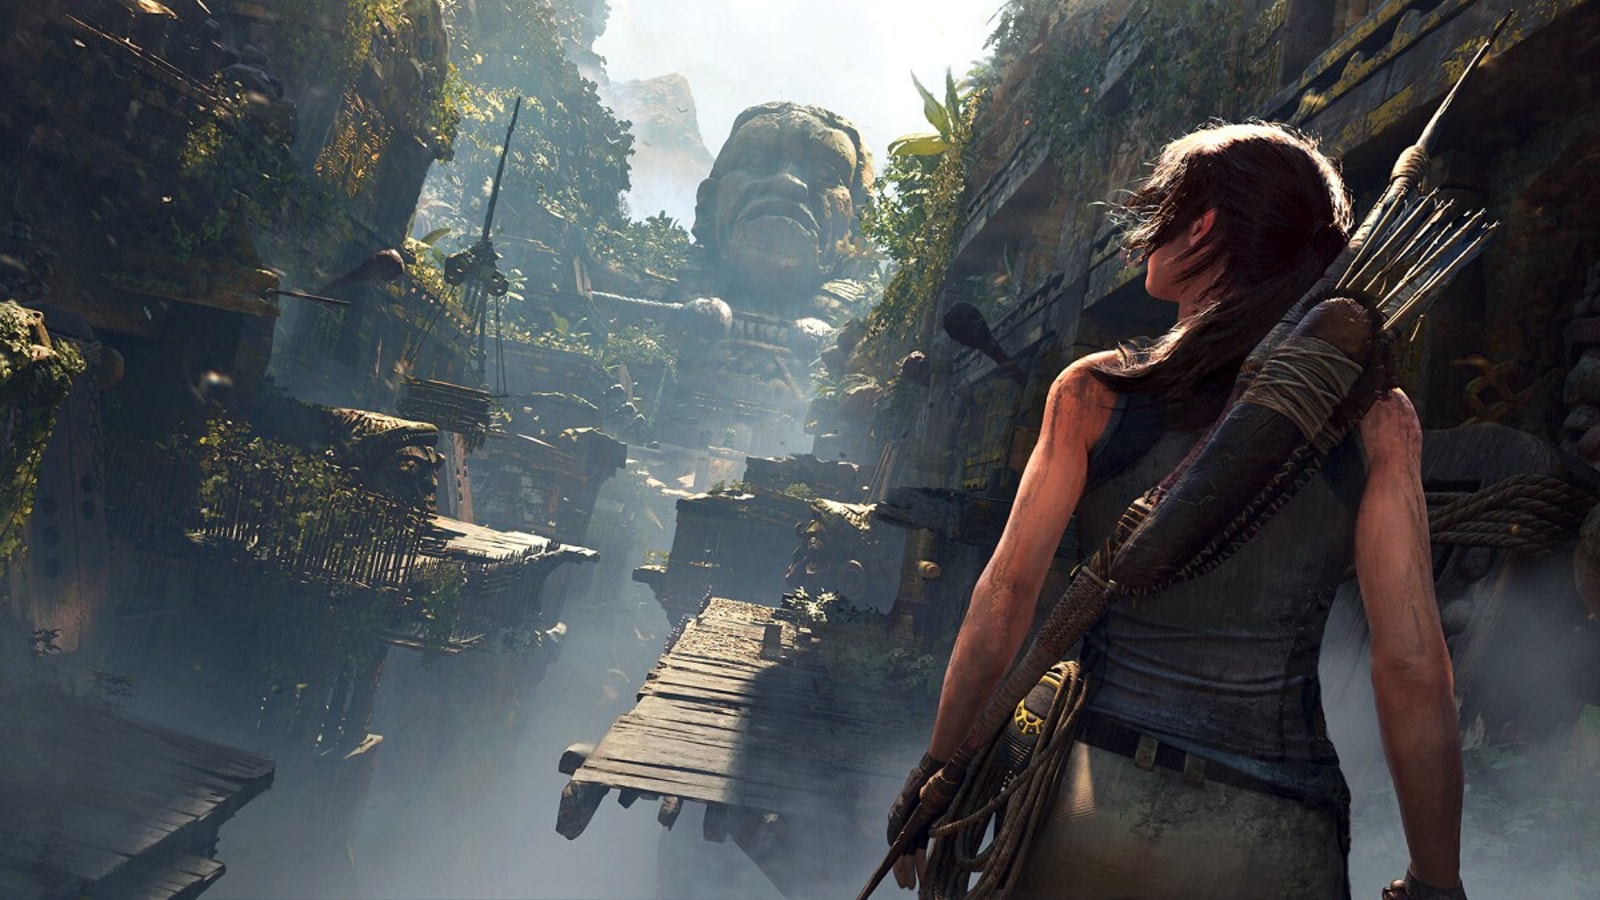 3 Tomb Raider games for FREE for limited time: Where and How to download | Gaming News